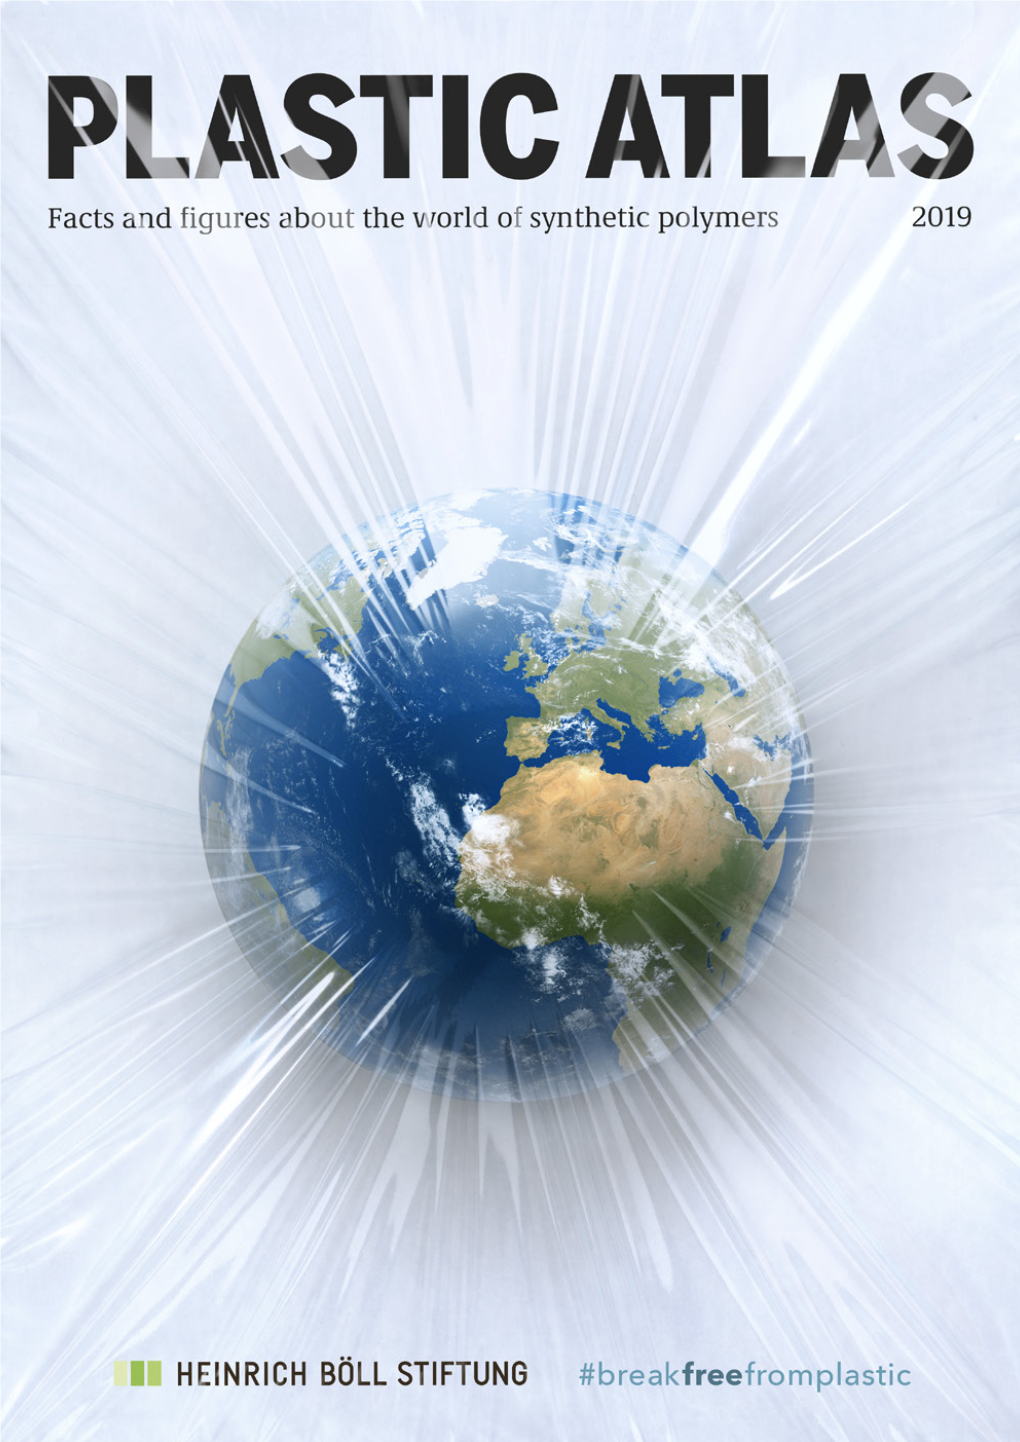 PLASTIC ATLAS 2019 Is Jointly Published by Heinrich Böll Foundation, Berlin, Germany, and Break Free from Plastic